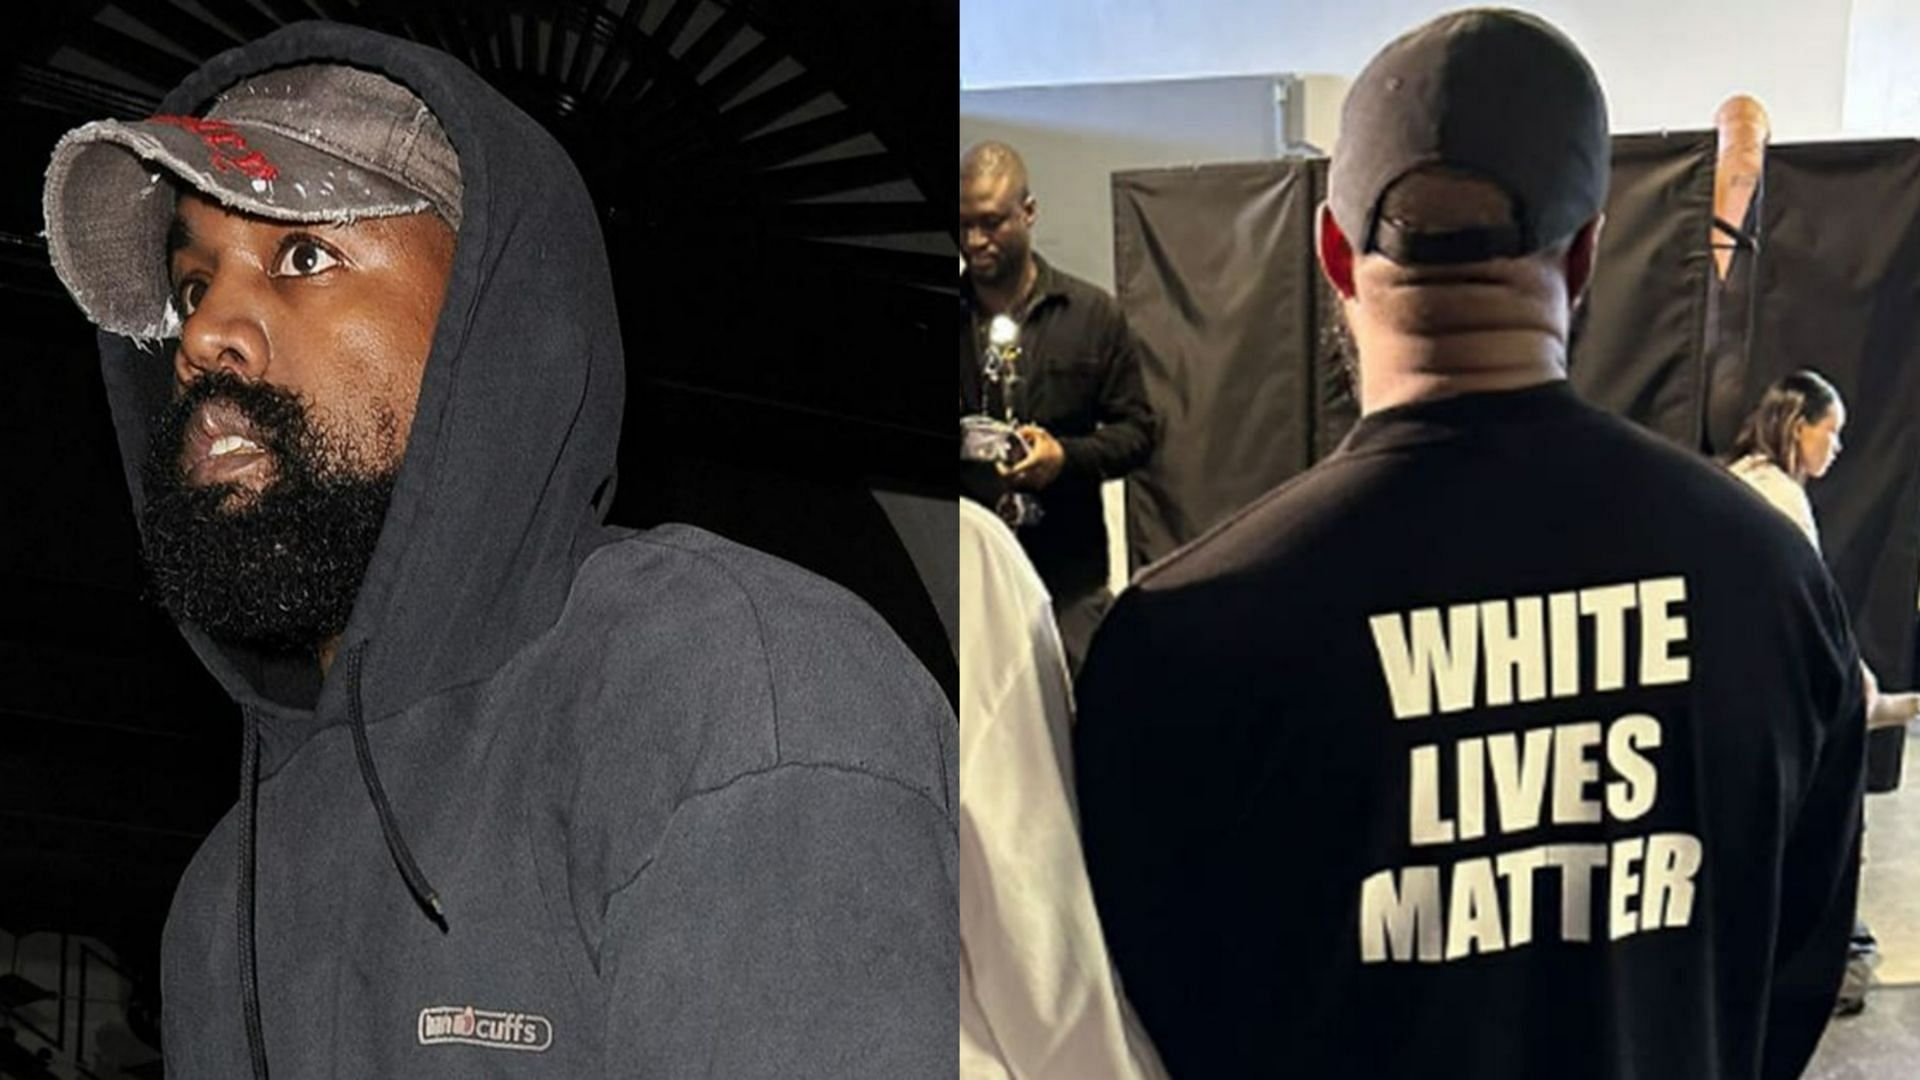 Kanye West wears White Lives Matter t-shirt in Paris Yeezy fashion show (Image via Getty Images and Kurrco/Twitter)